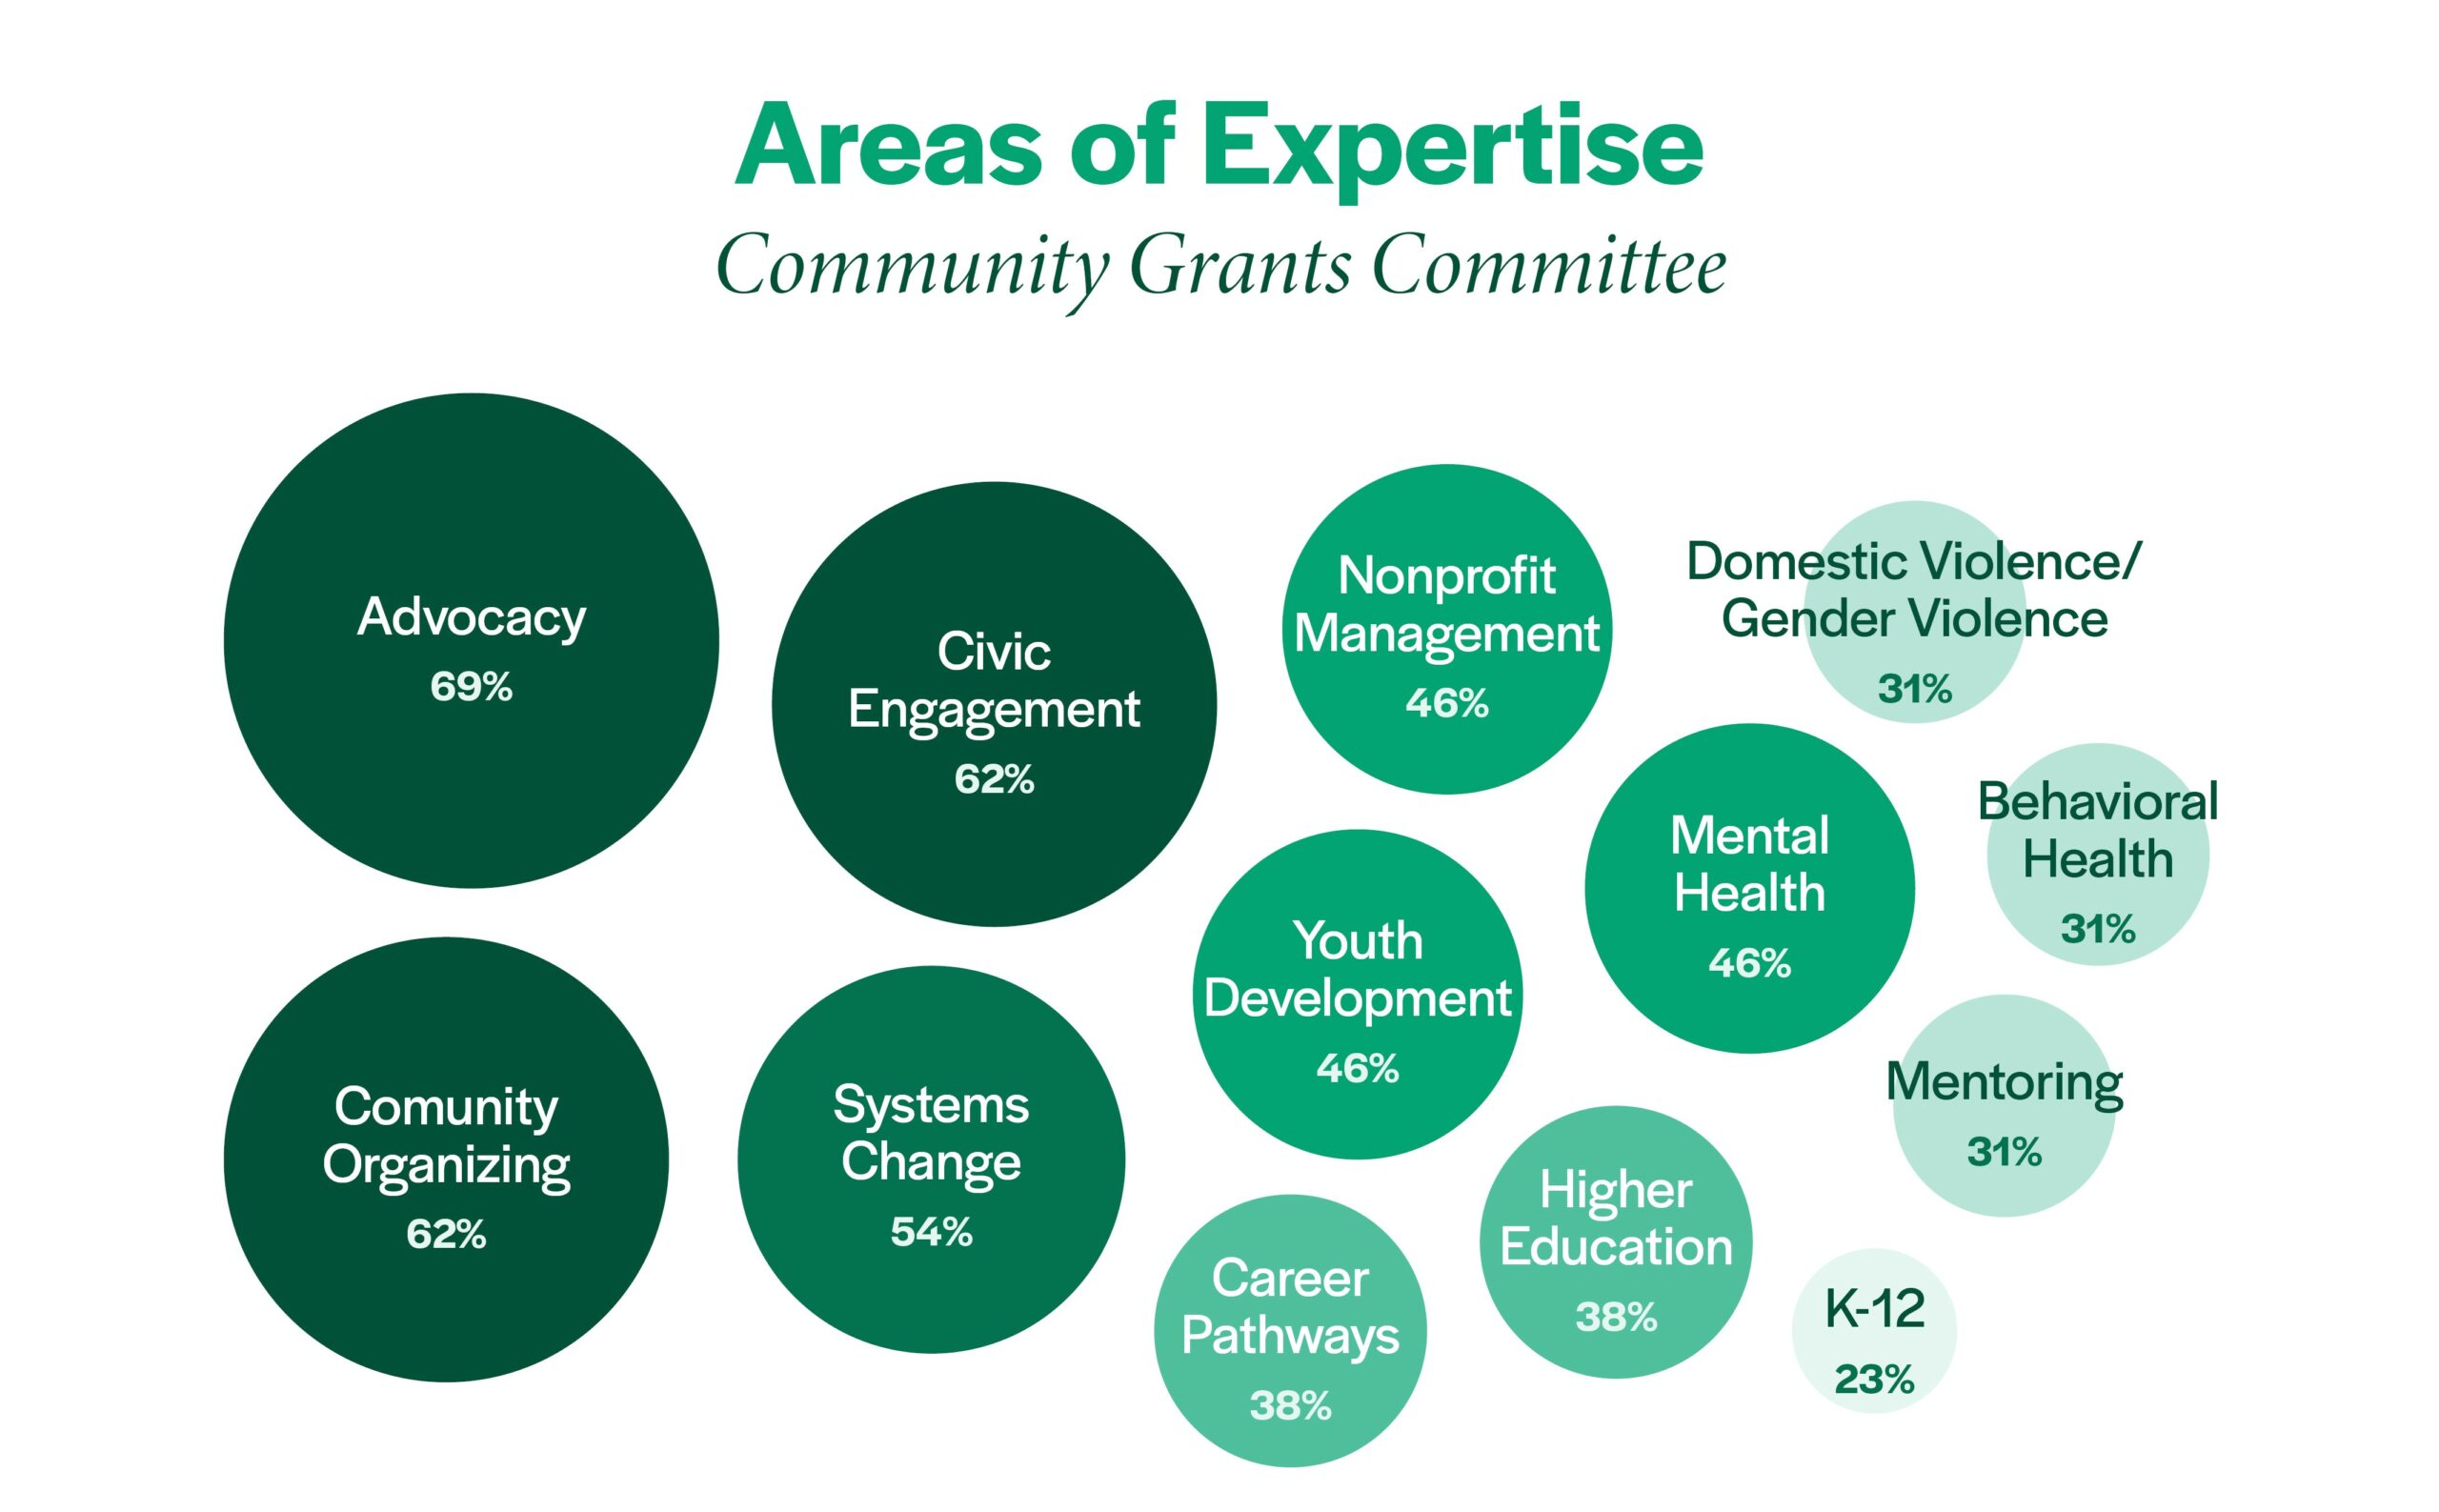 This is an infographic showing the Community Grants Committee's Areas of Expertise. It shows the percentage of the Committee that has expressed that they have expertise in the following areas: Advocacy​, 69%​ Behavioral health​, 31%​ Career pathways​, 38%​ Clark County​, 46%​ Community Organizing​, 62%​ Civic Engagement​, 62%​ Domestic Violence/Gender Violence​, 31%​ Higher Education​, 38%​ K-12​, 23%​ Mental Health​, 46%​ Mentoring​, 31%​ Nonprofit Management​, 46%​ Systems Change​, 54%​ Youth Development​, 46%​